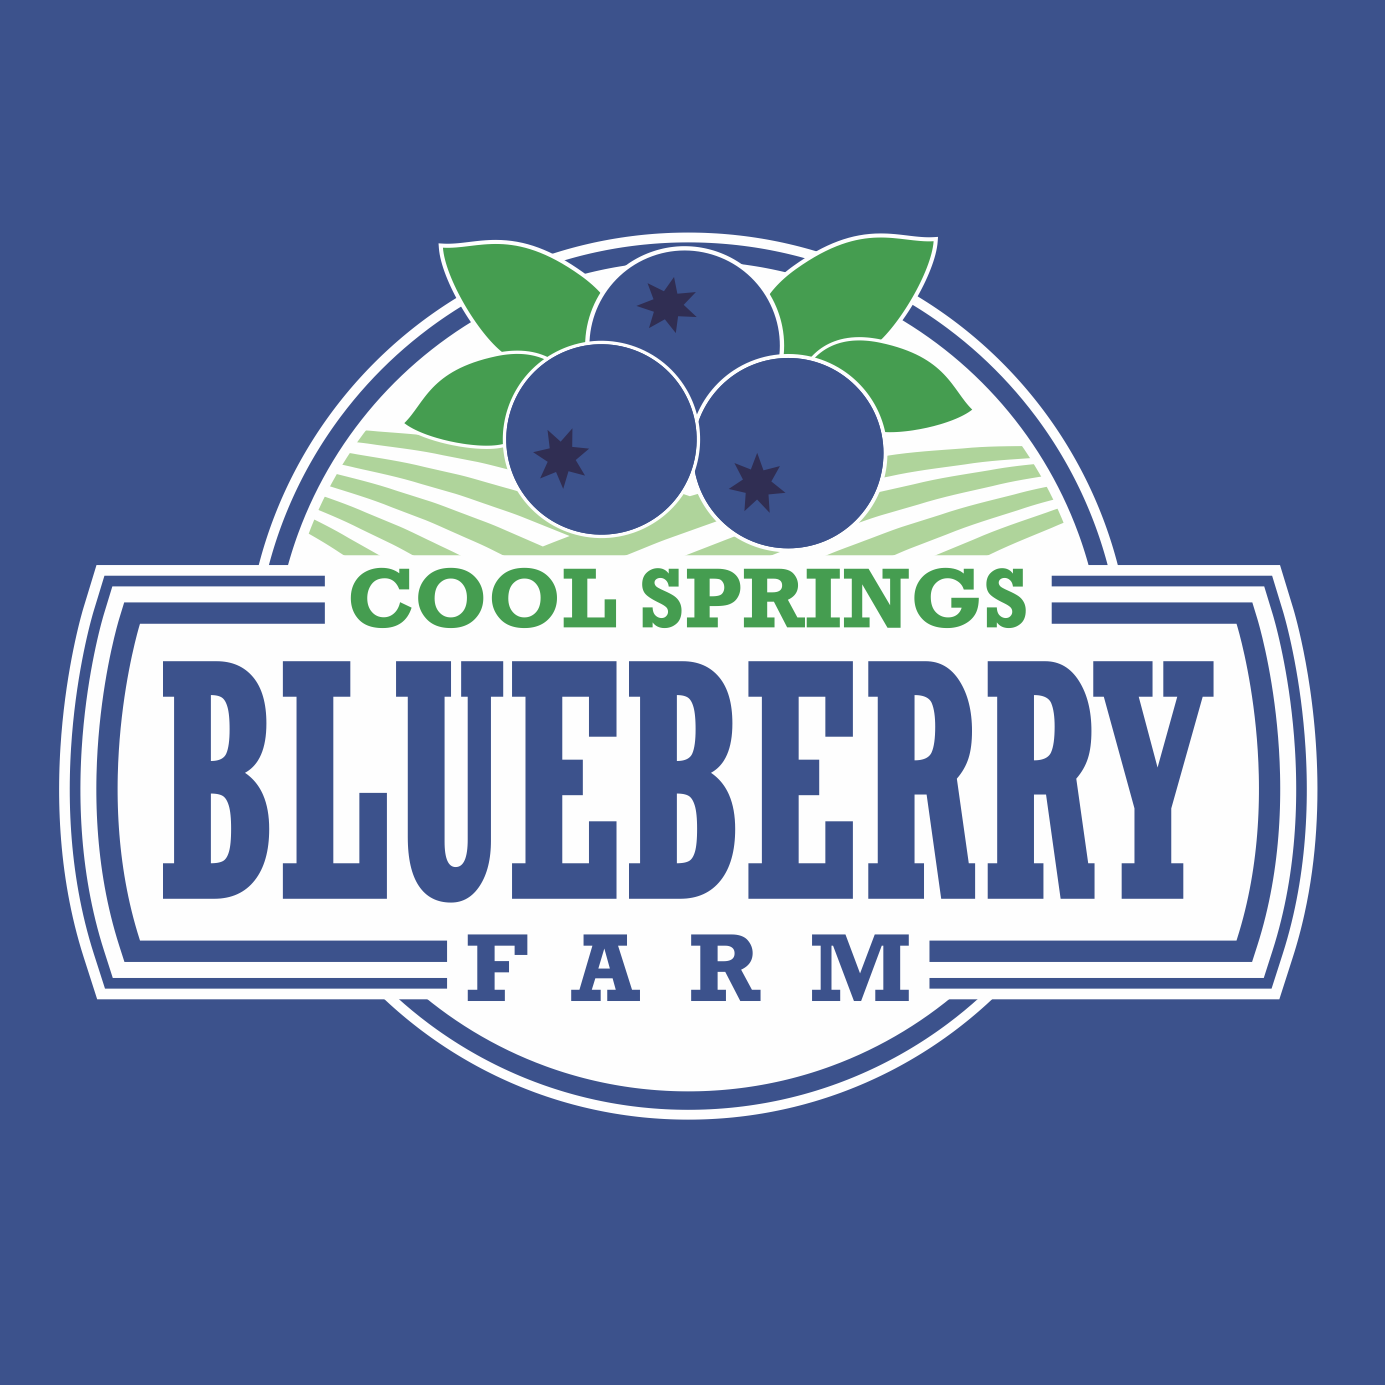 Business logo of Cool Springs Blueberry Farm